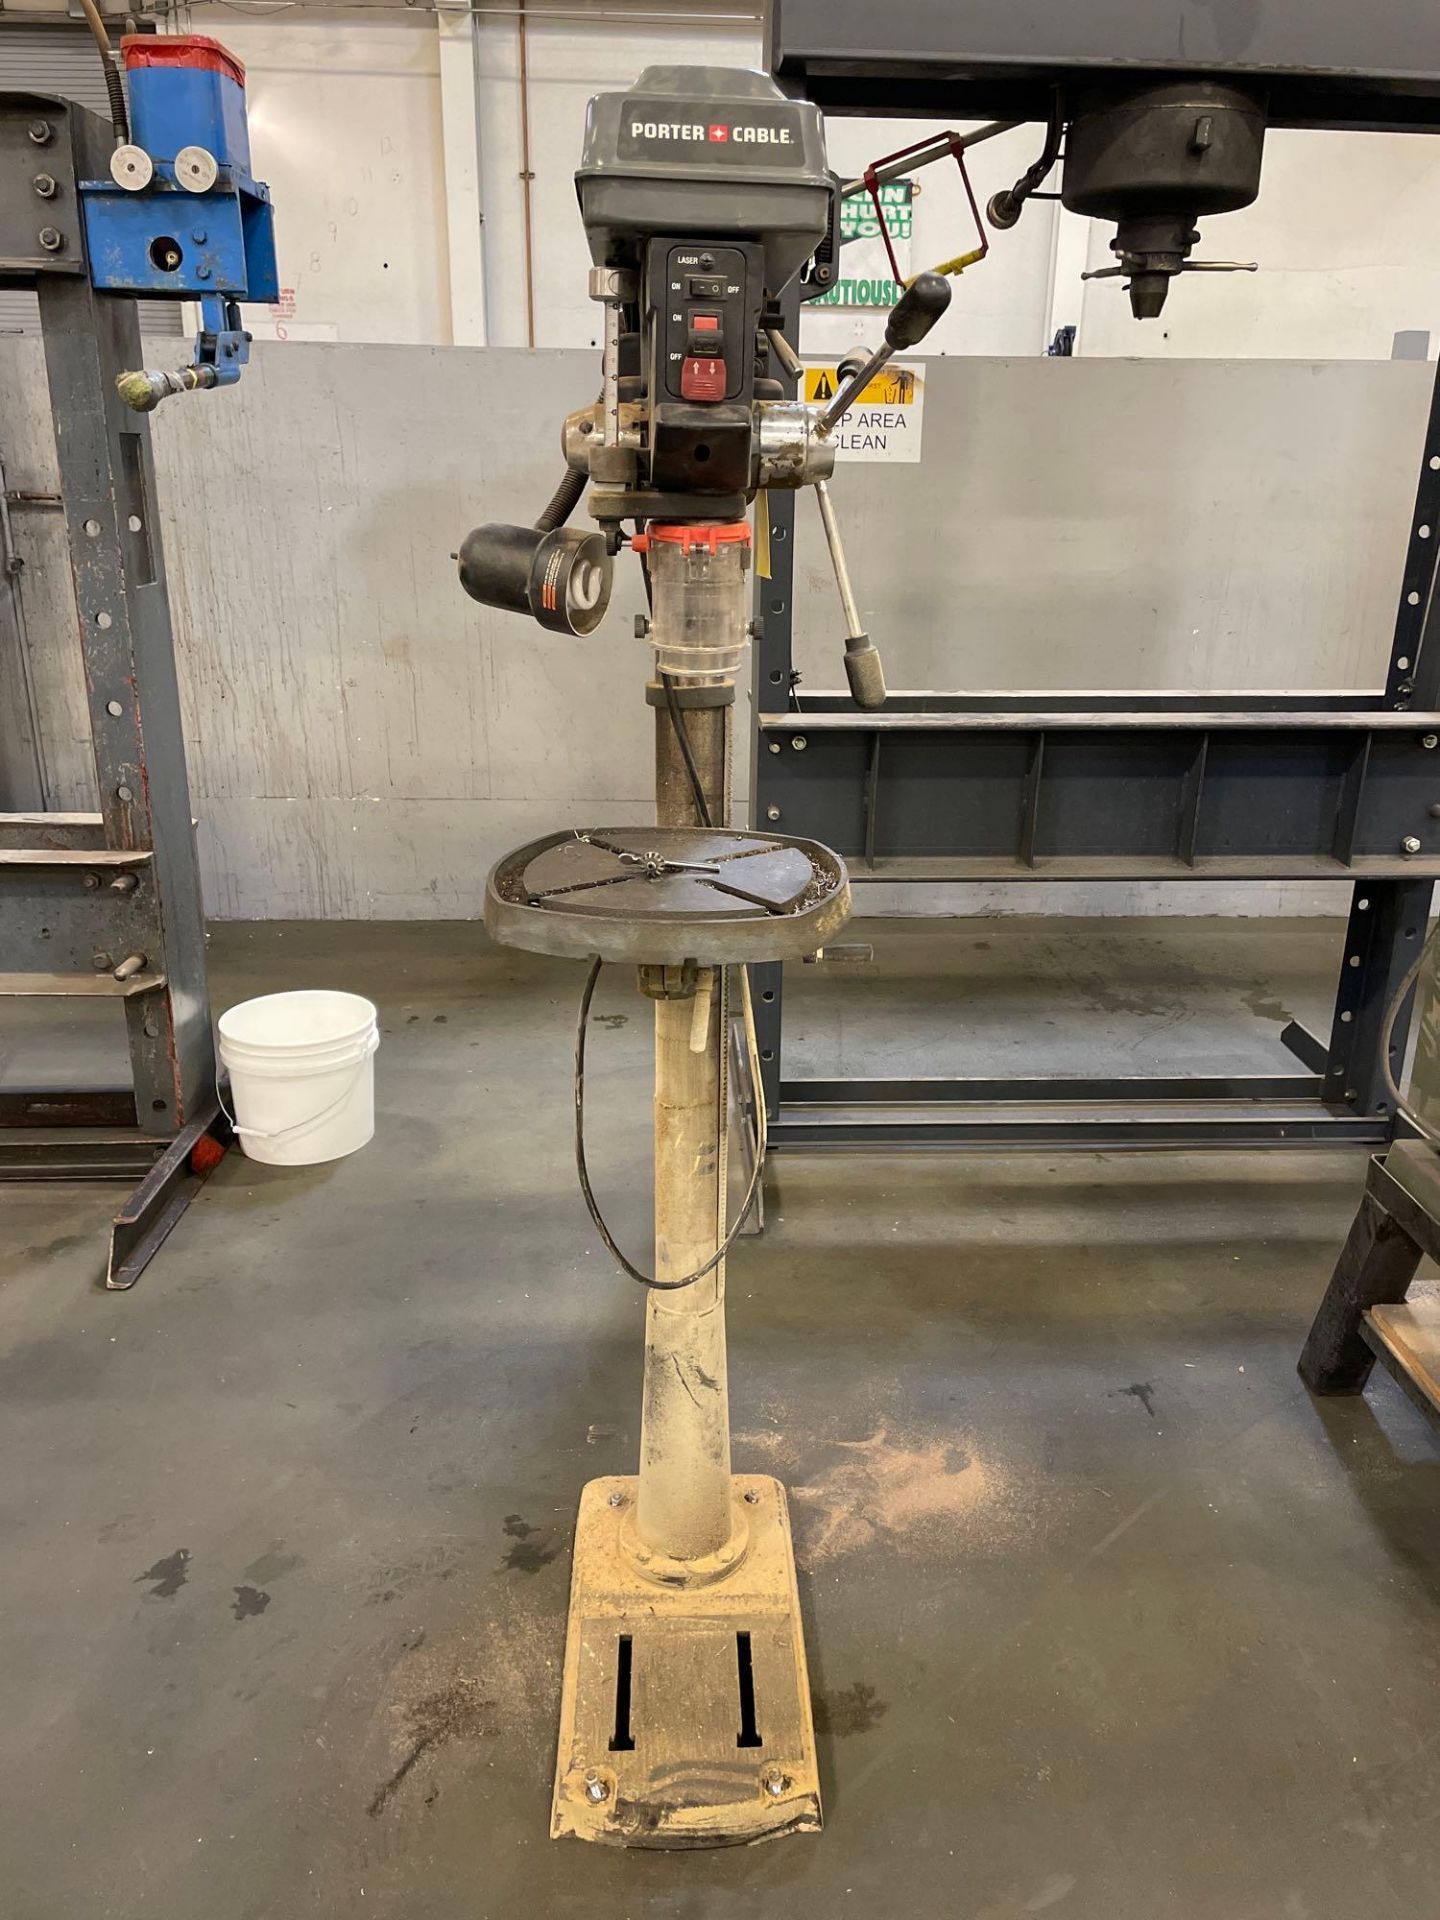 Porter Cable Pedestal Drill Press - Image 2 of 8